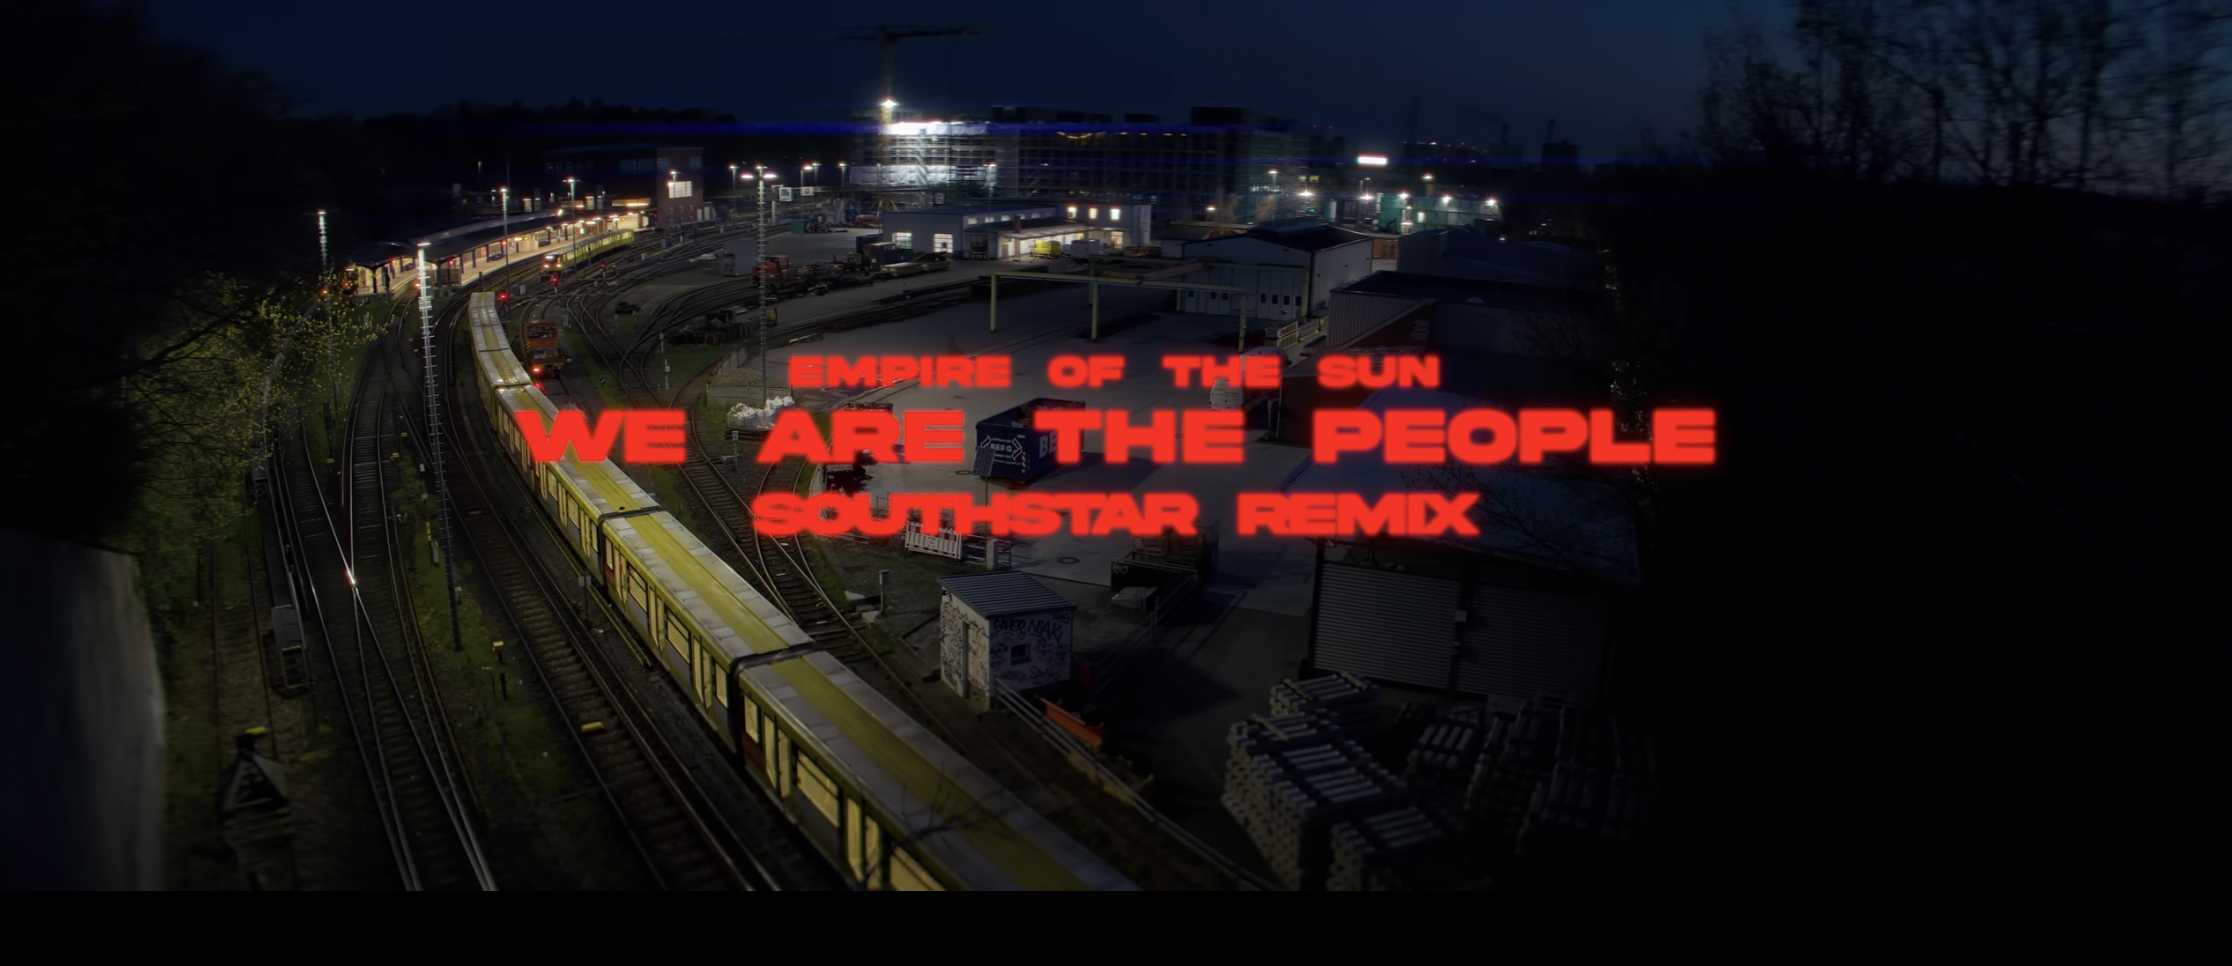 SOUTHSTAR REMIX - WE ARE THE PEOPLE MUSIKVIDEO 8